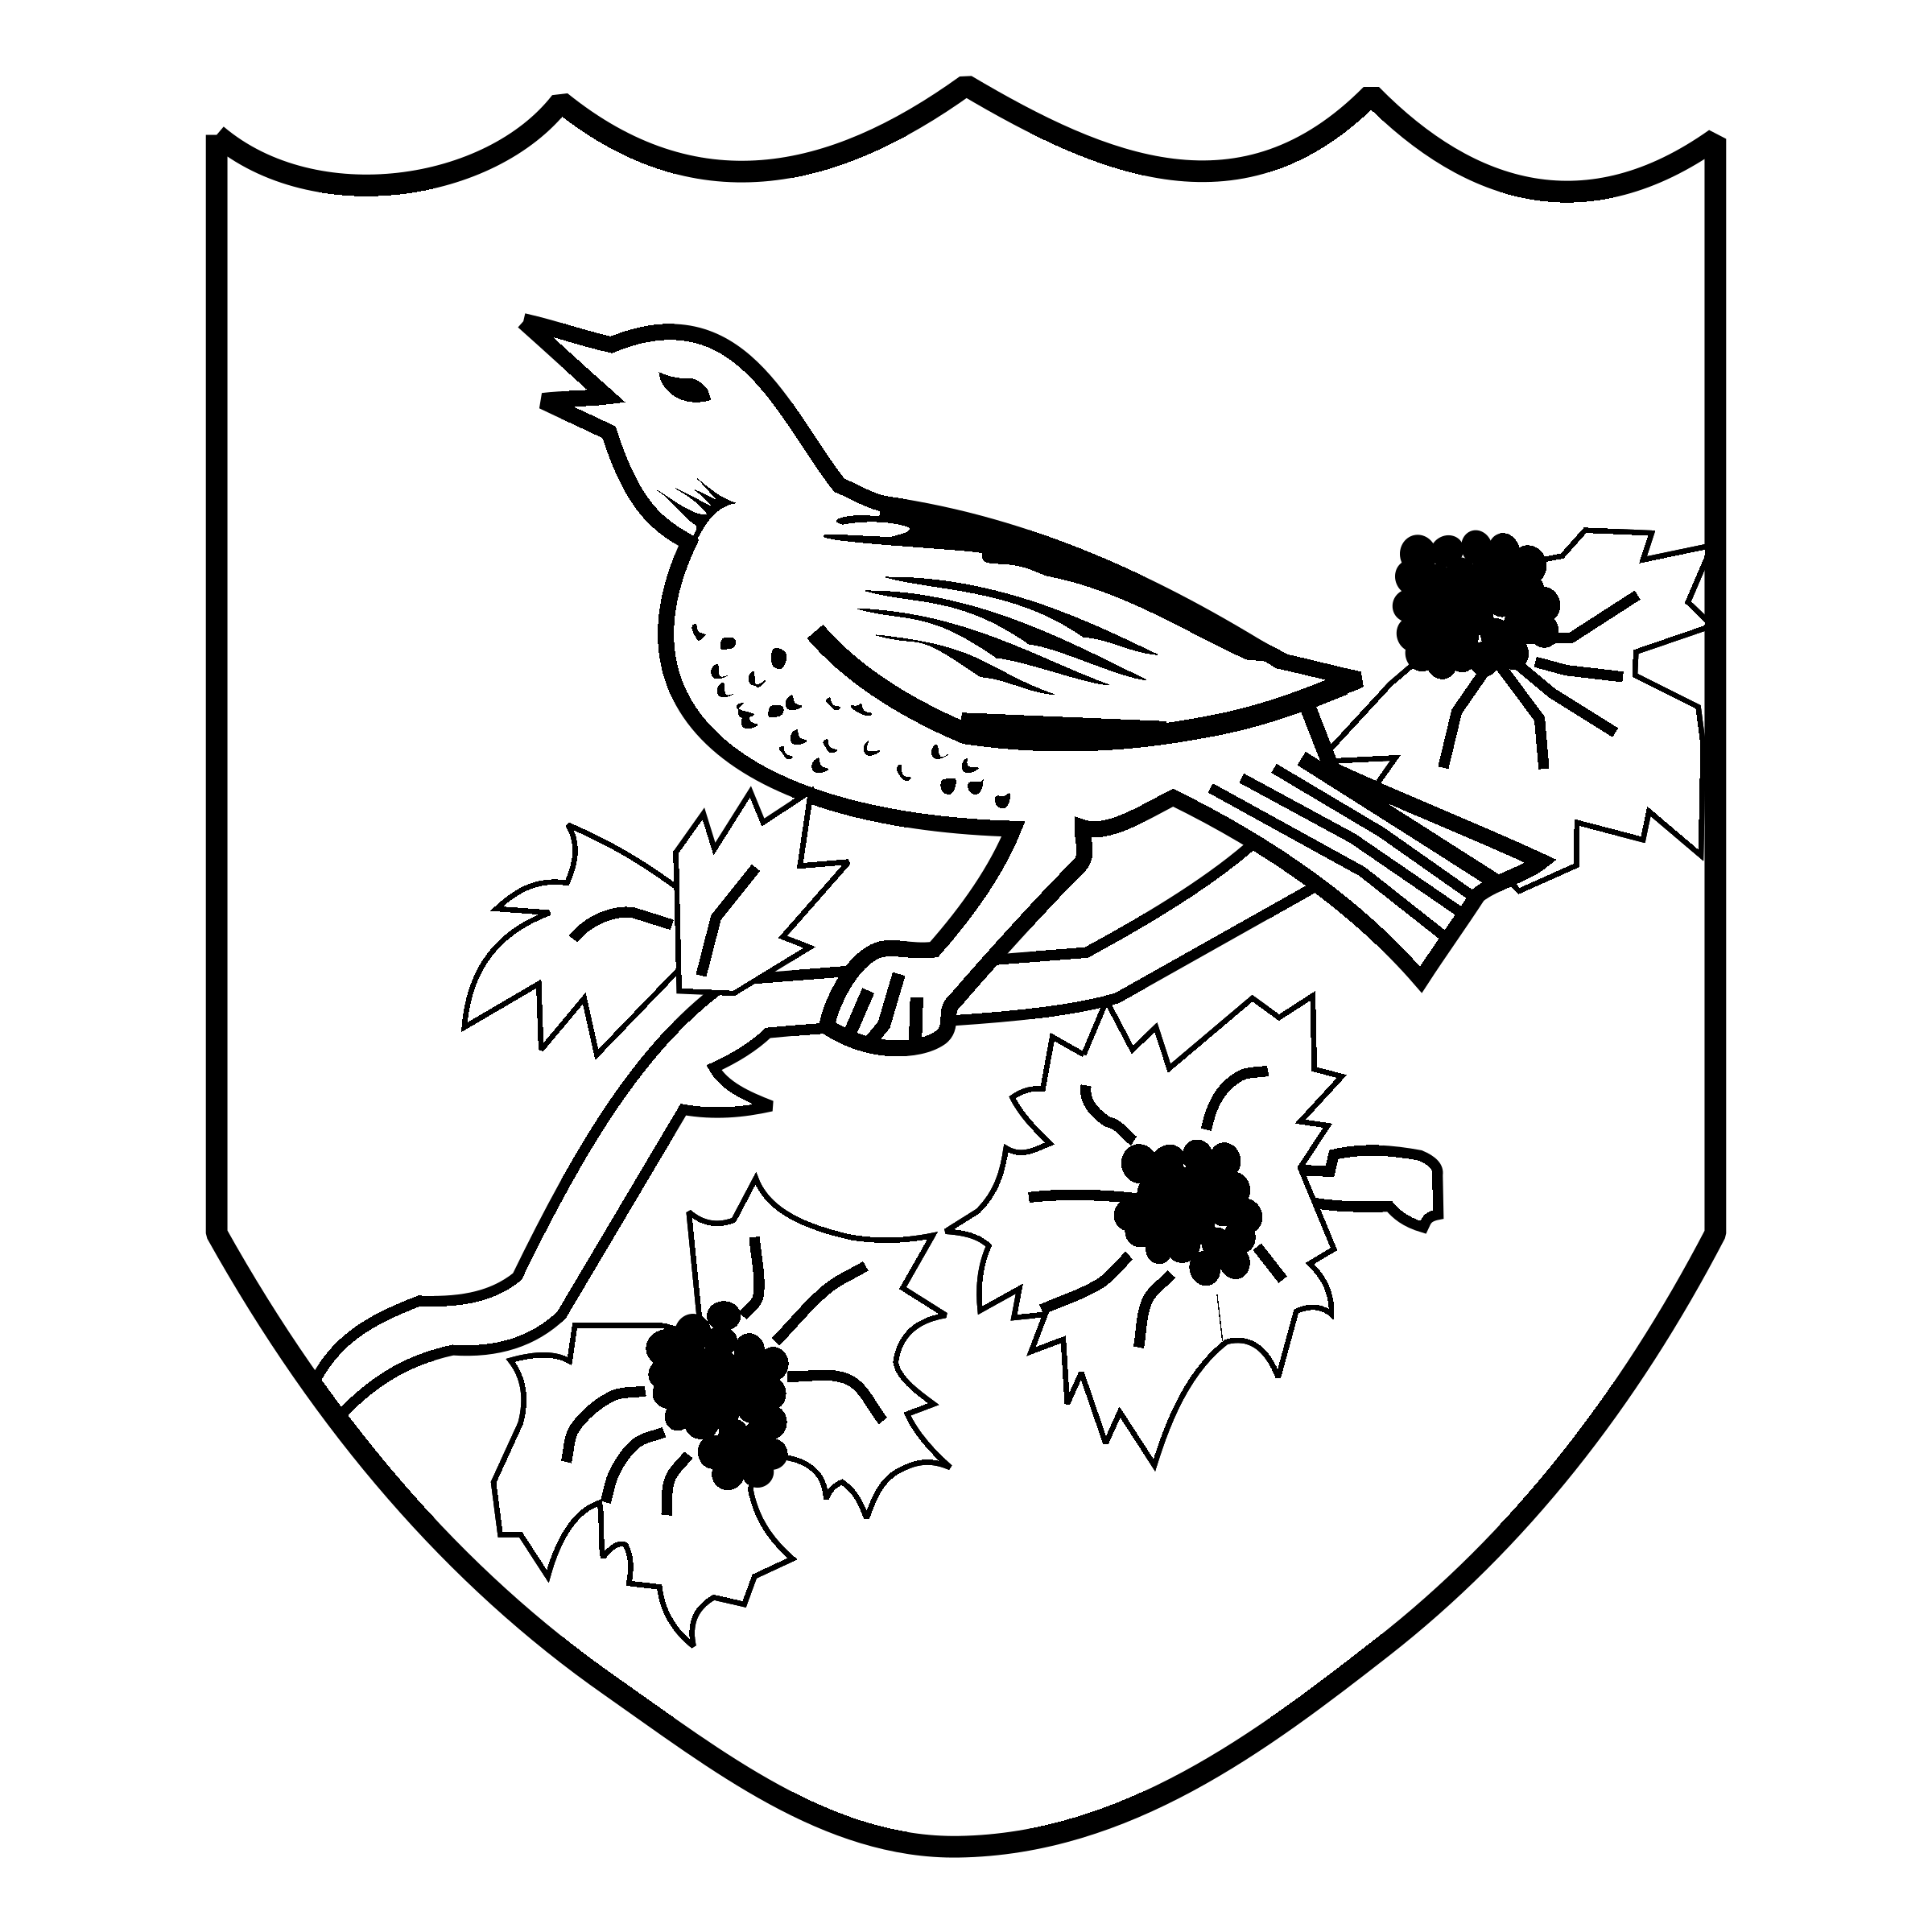 West Brom Logo - West Bromwich Albion Logo PNG Transparent & SVG Vector - Freebie Supply